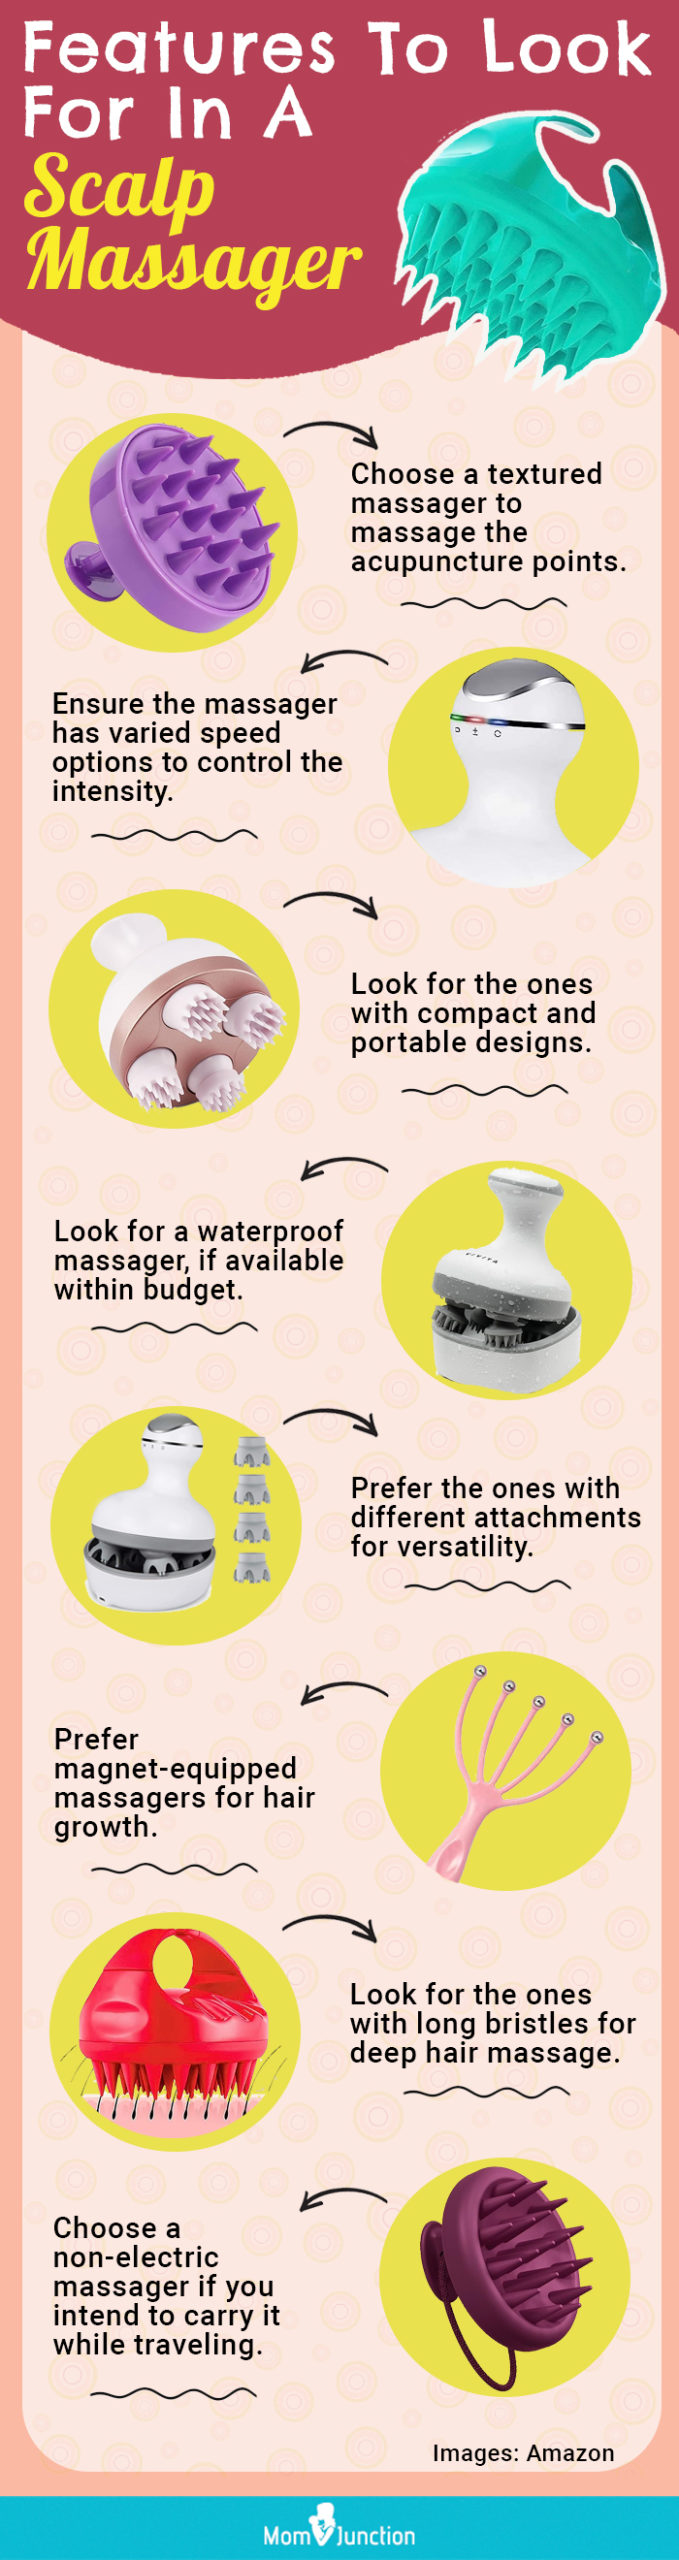 Features To Look For In A Scalp Massager (infographic)